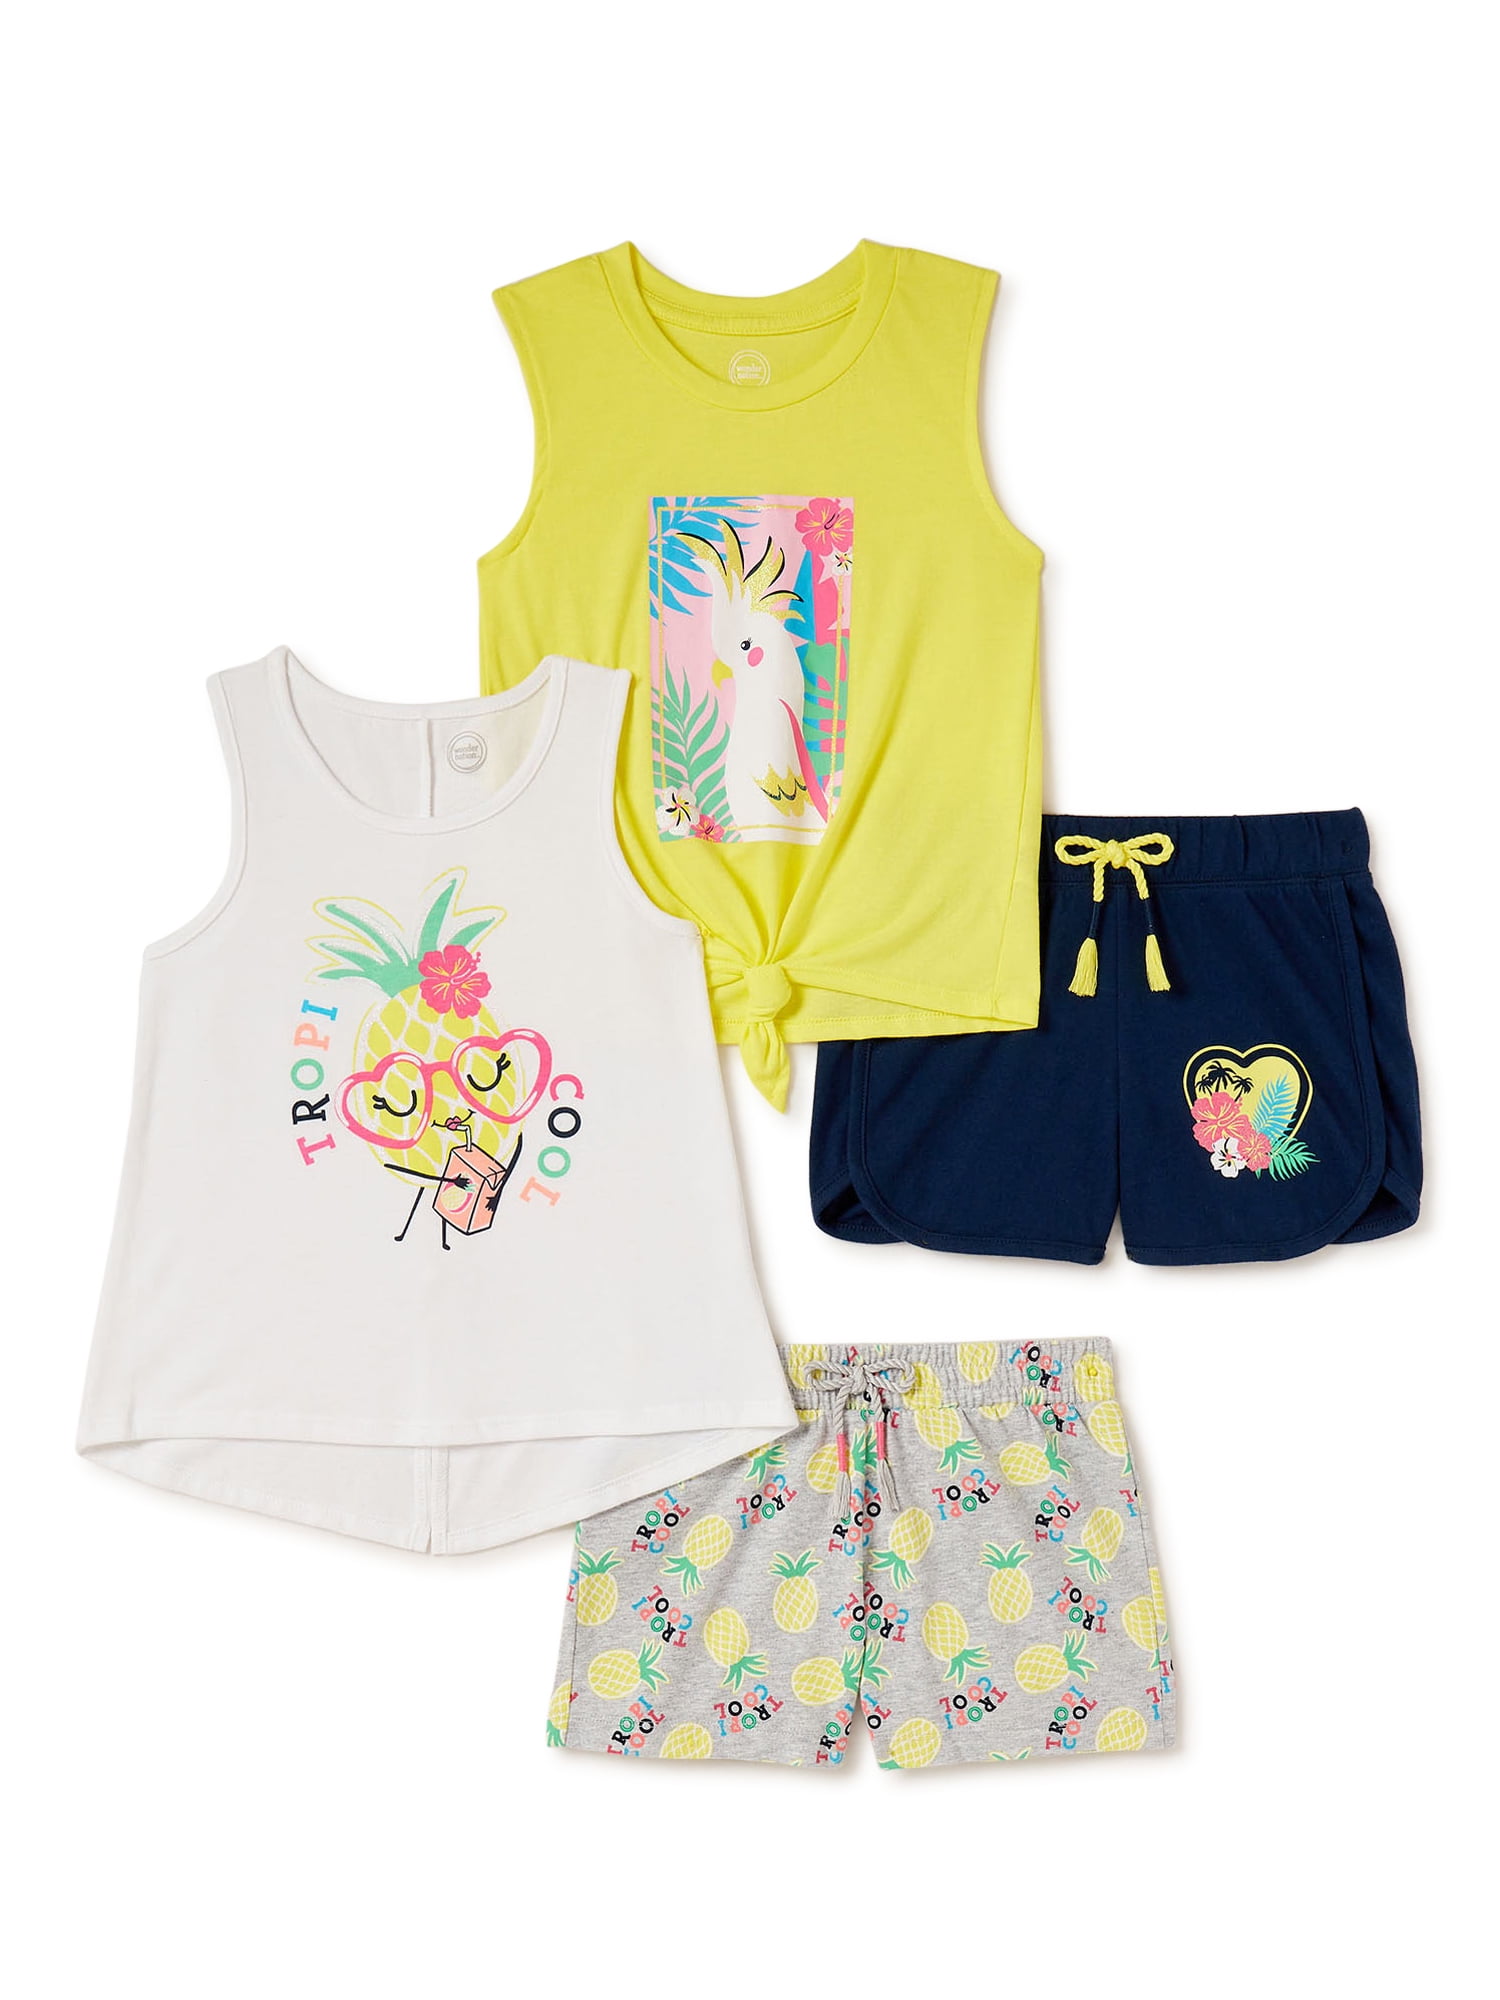 Wonder Nation Girls Graphic Tank Tops and Shorts, 4-Piece Outfit Set ...